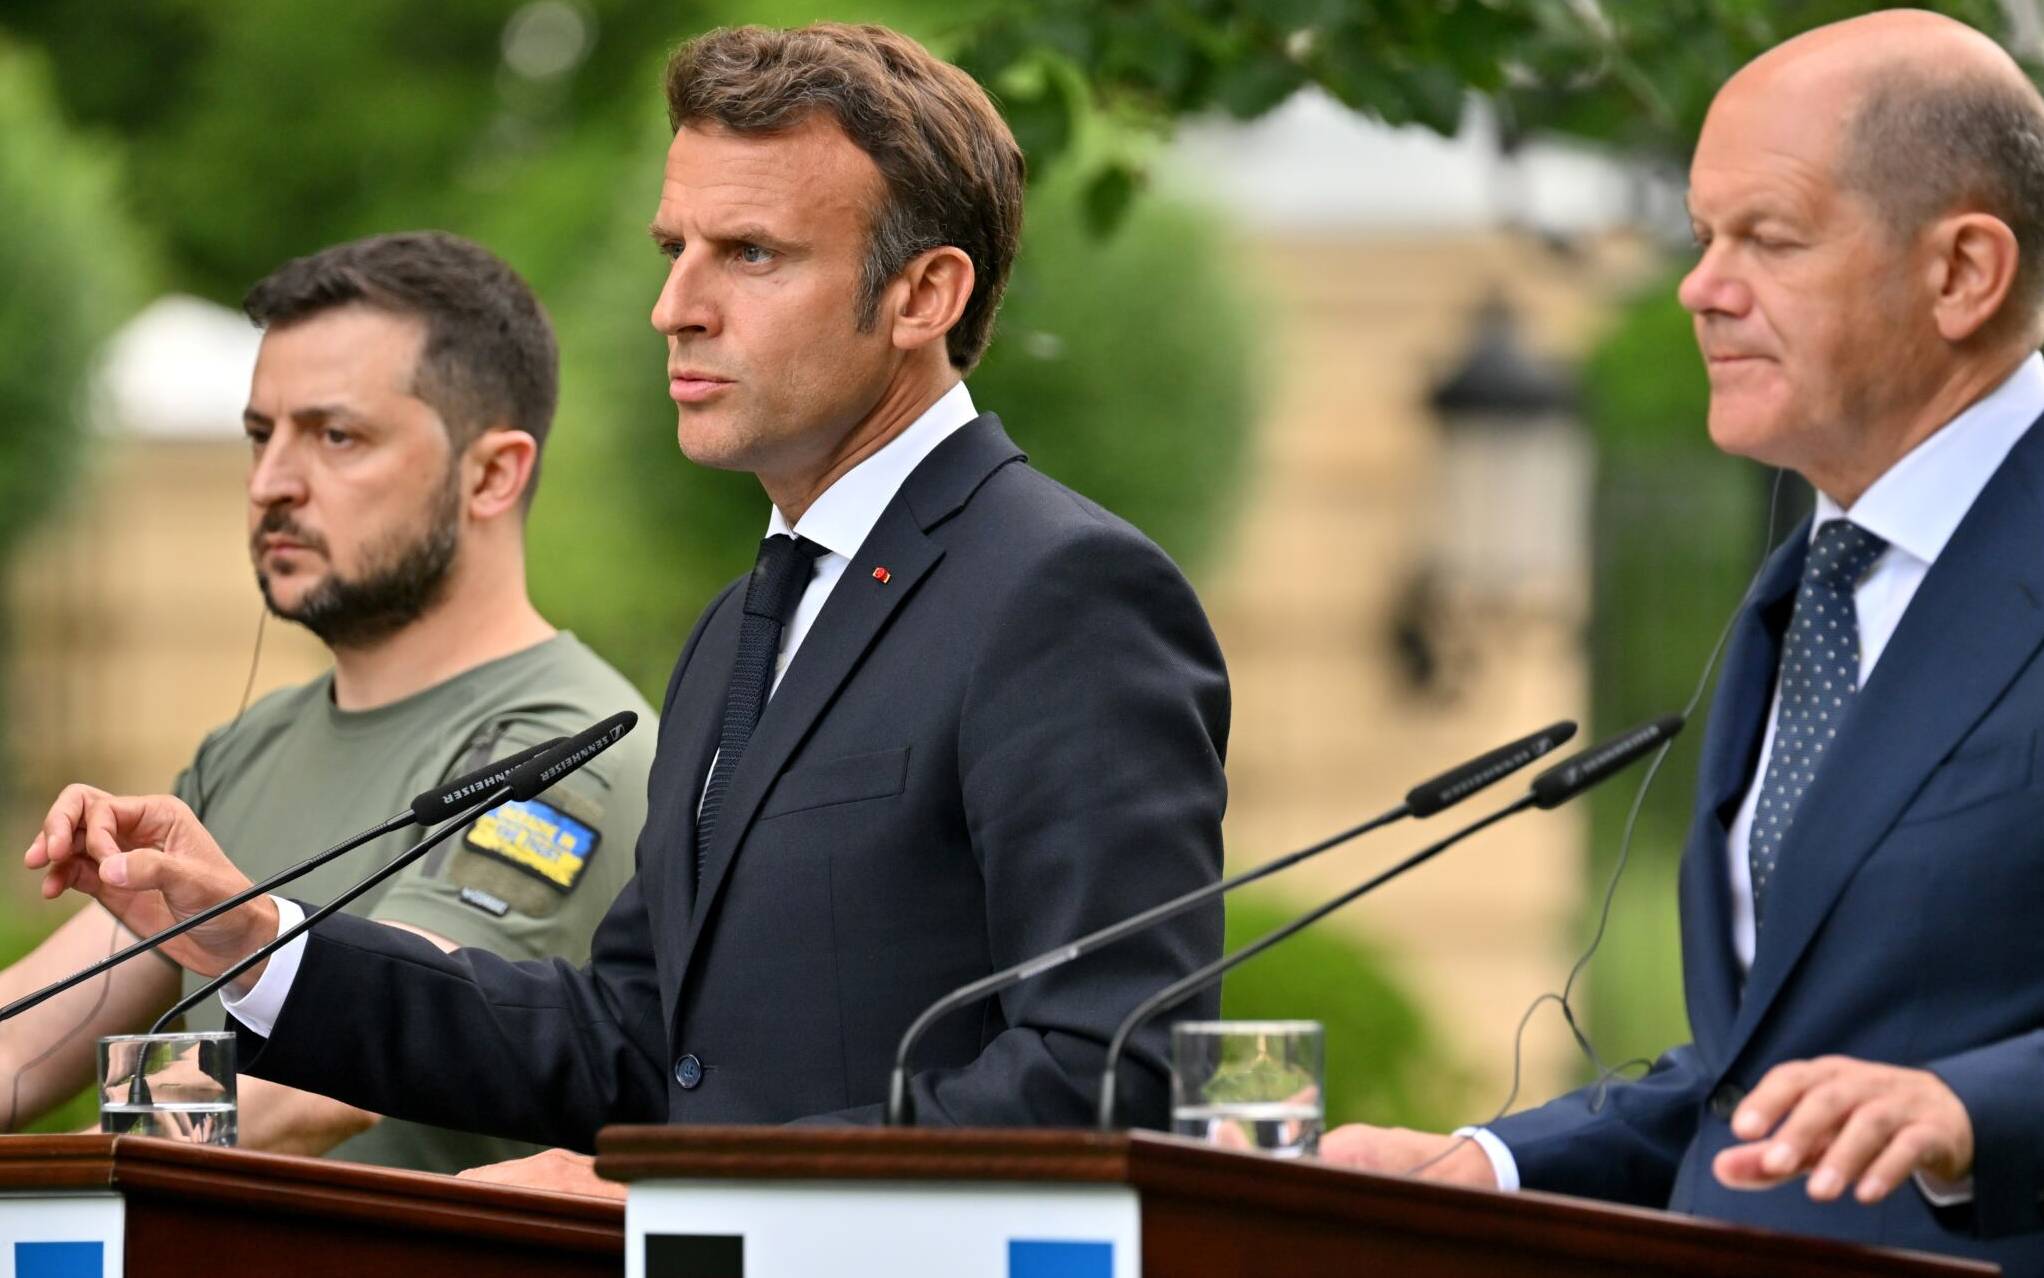 (From L) Ukrainian President Volodymyr Zelensky, President of France Emmanuel Macron and Chancellor of Germany Olaf Scholz give a joint press conference following their meeting in Kyiv on June 16, 2022. - The European Union's most powerful leaders on June 16 embraced Ukraine's bid to be accepted as a candidate for EU membership, in a powerful symbol of support in Kyiv's battle against Russia's invasion. (Photo by Sergei SUPINSKY / AFP)